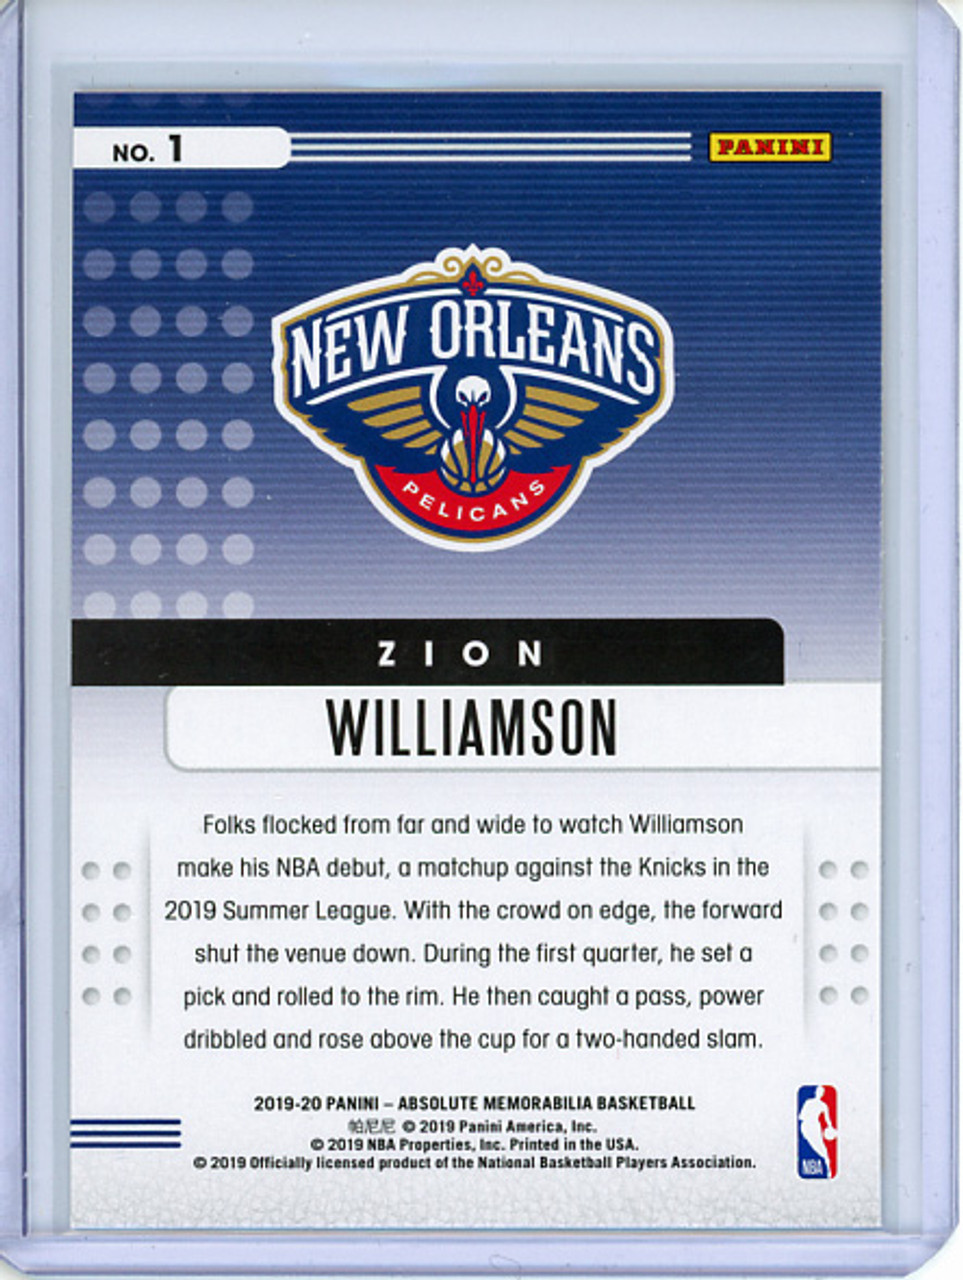 Zion Williamson 2019-20 Absolute, Rookies Yellow #1 (3)